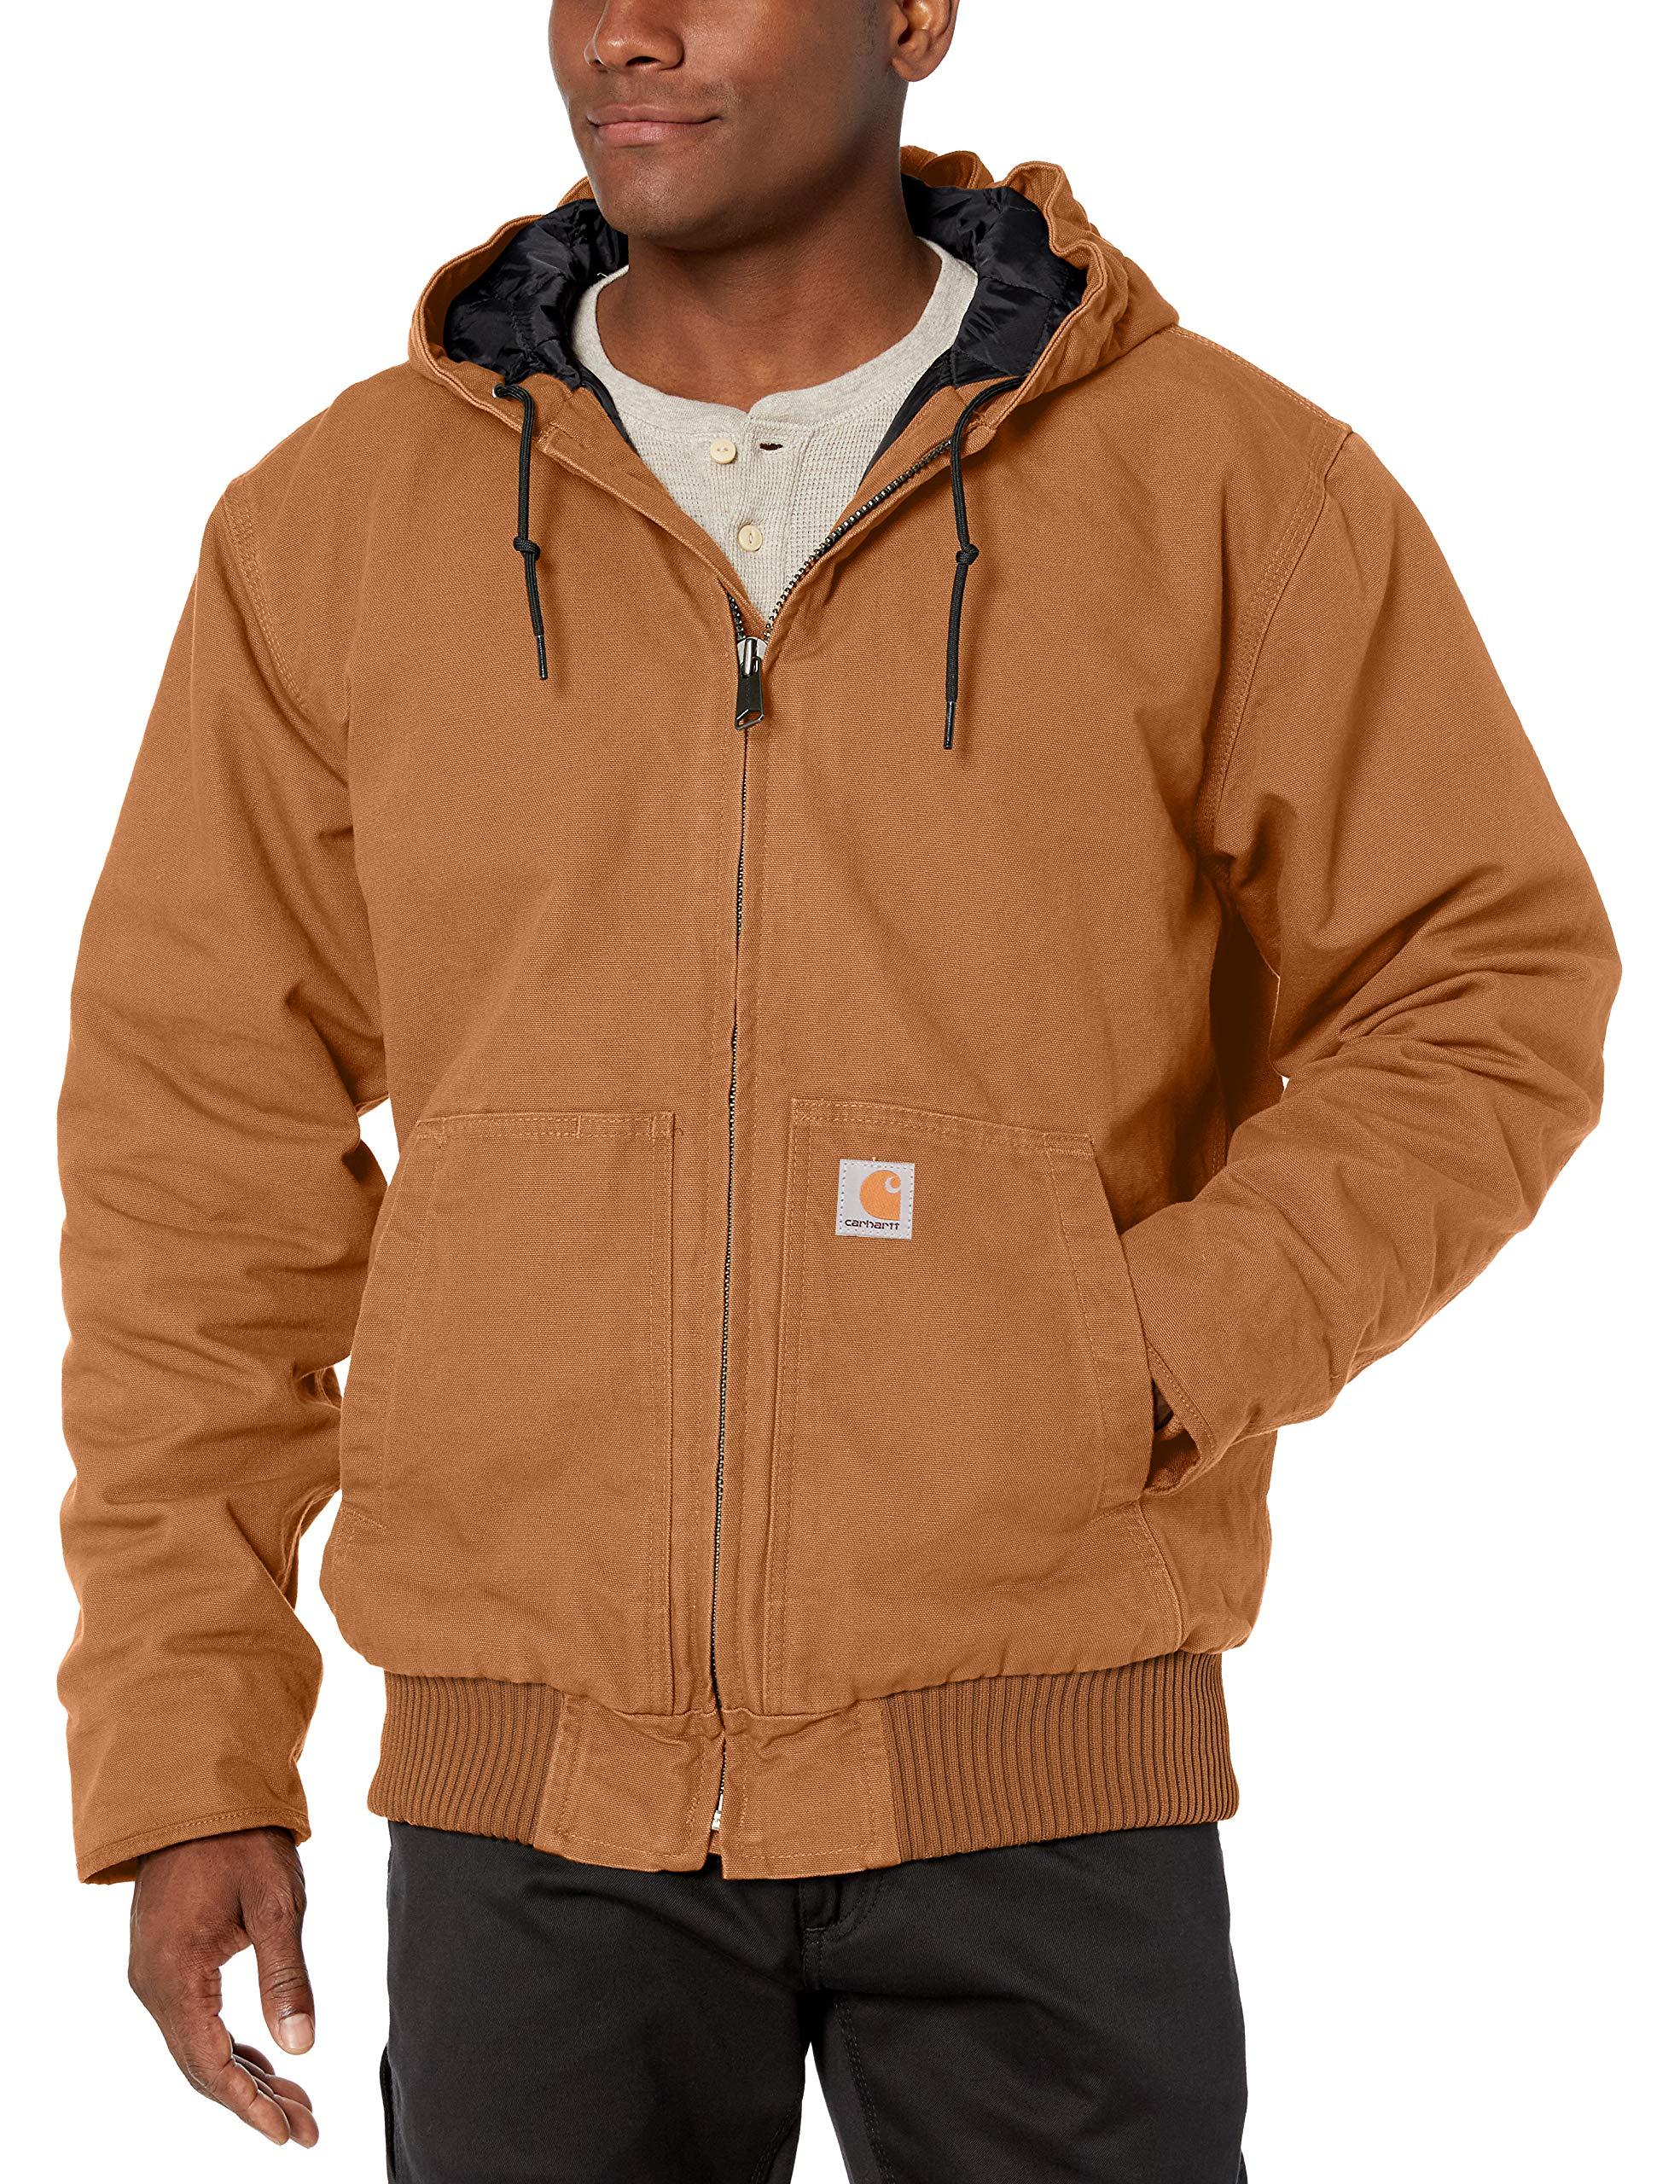 Carhartt Cotton Big Active Jacket J130 in Brown for Men - Save 8% - Lyst